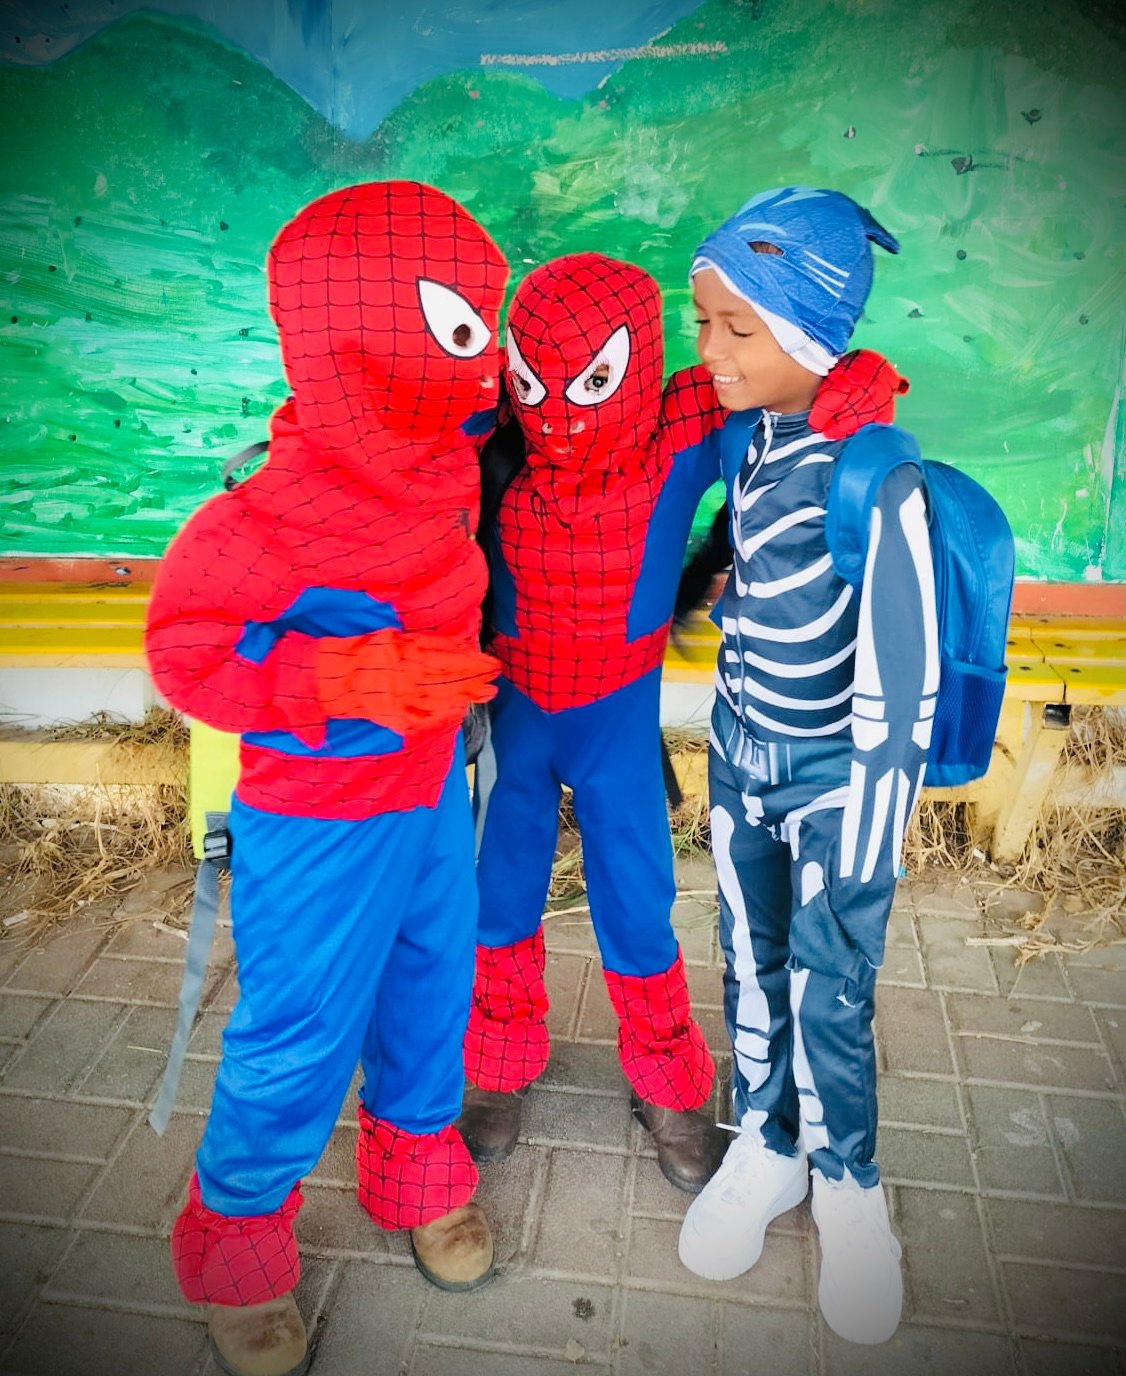 Children in Afula-Gilboa enjoy the Purim costumes collected by synagogues in Rhode Island and sent to Israel.